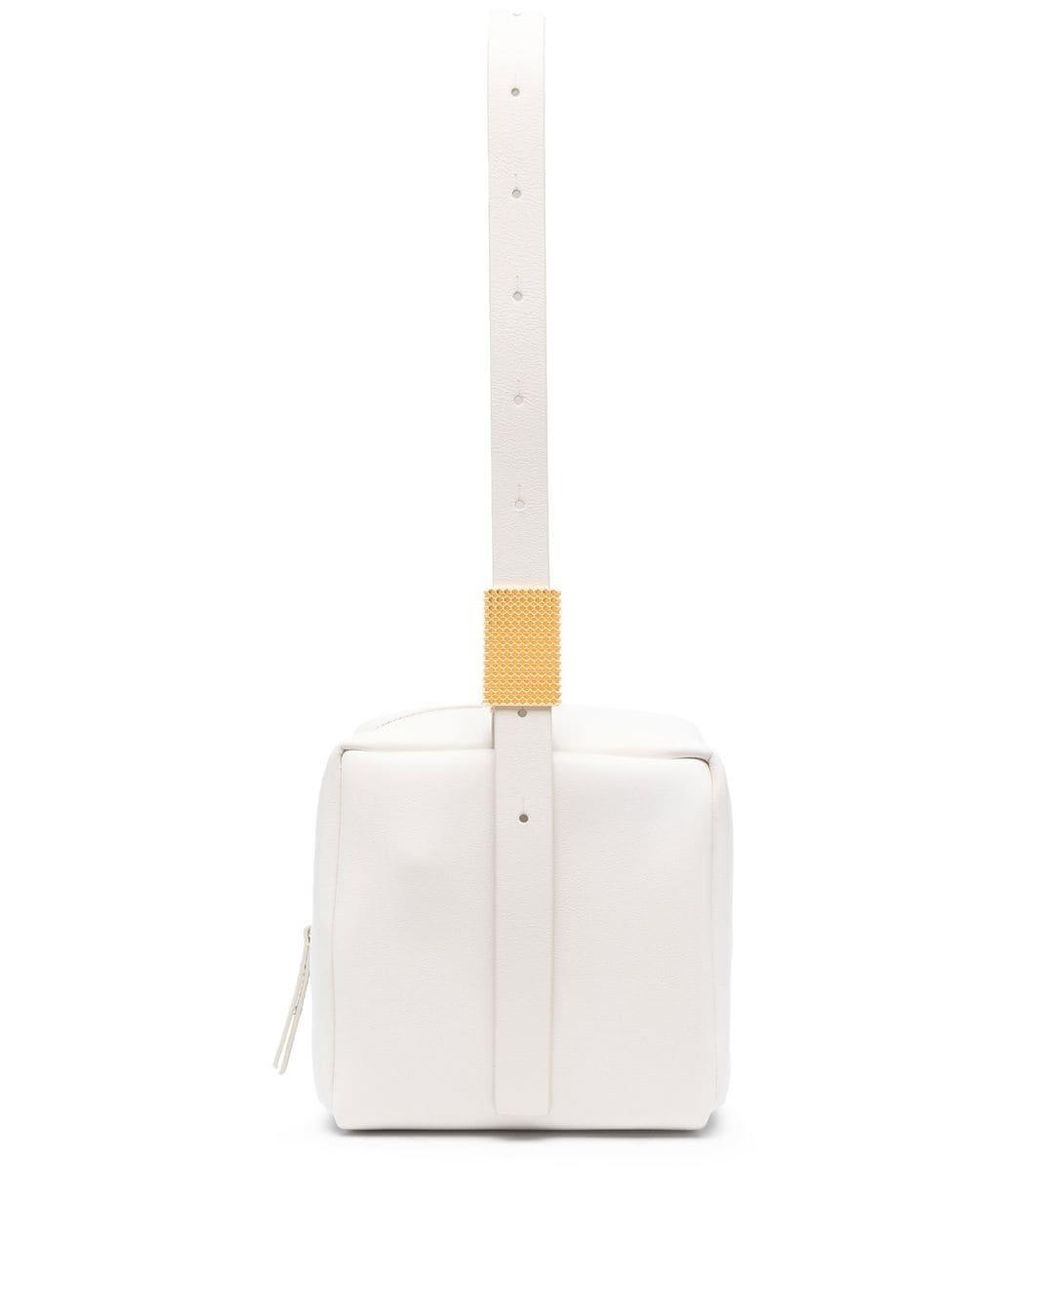 Lanvin Tempo Leather Shoulder Bag in White | Lyst